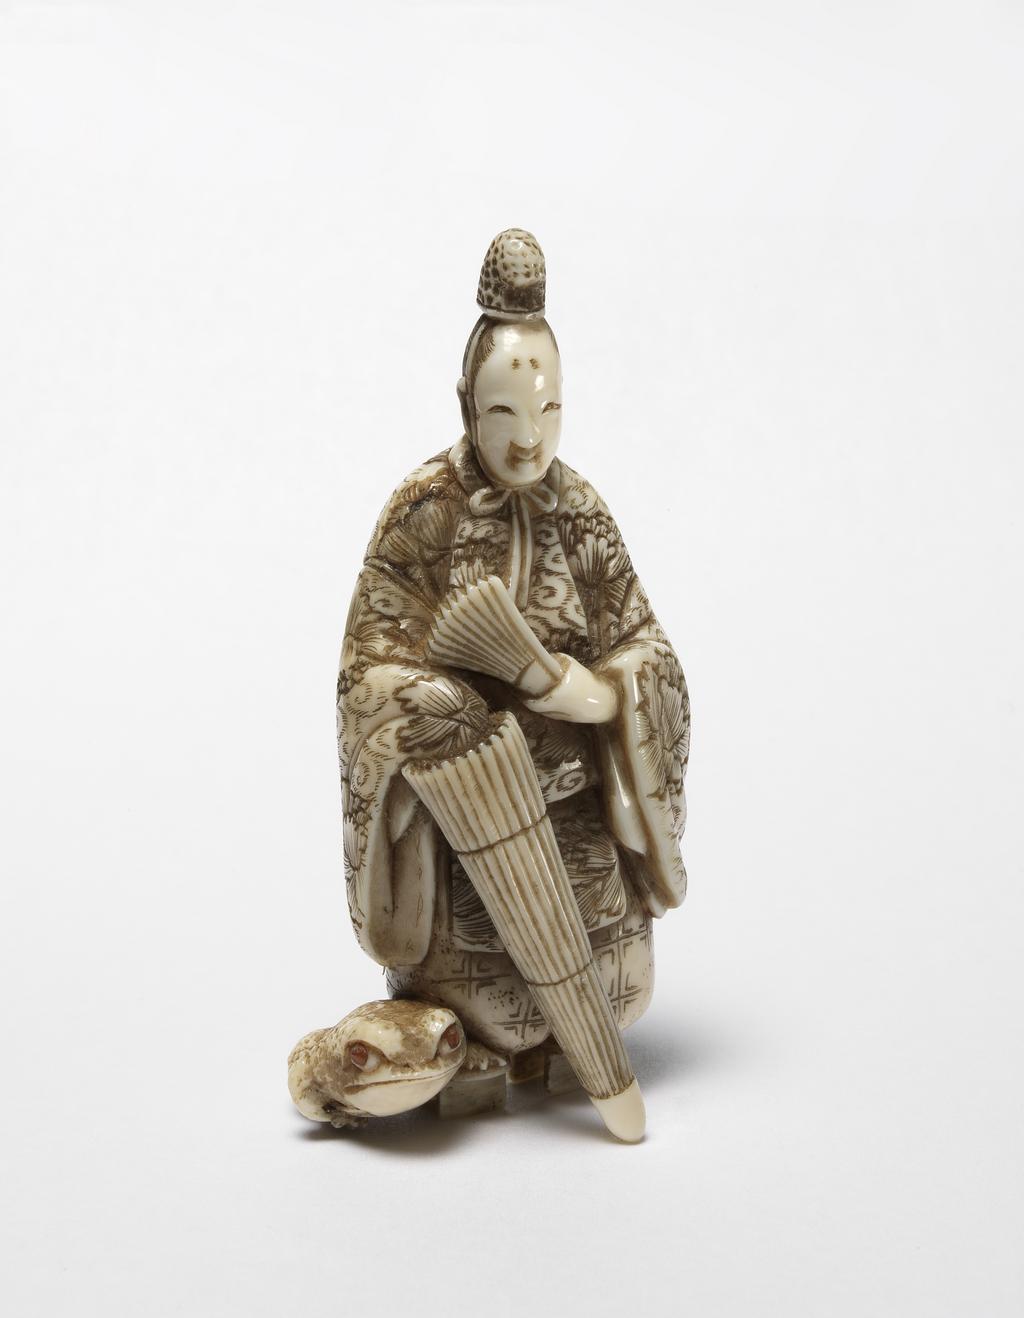 An image of Netsuke. Ono No Tofu in his ceremonial garments wearing Geta (wooden clogs) standing and holding his umbrella in his right hand and a folding fan in his left hand. A large frog is sitting next to his right foot. Ivory, carved, the eyes of frog are inlaid with horn, 1870-1900. Japanese.